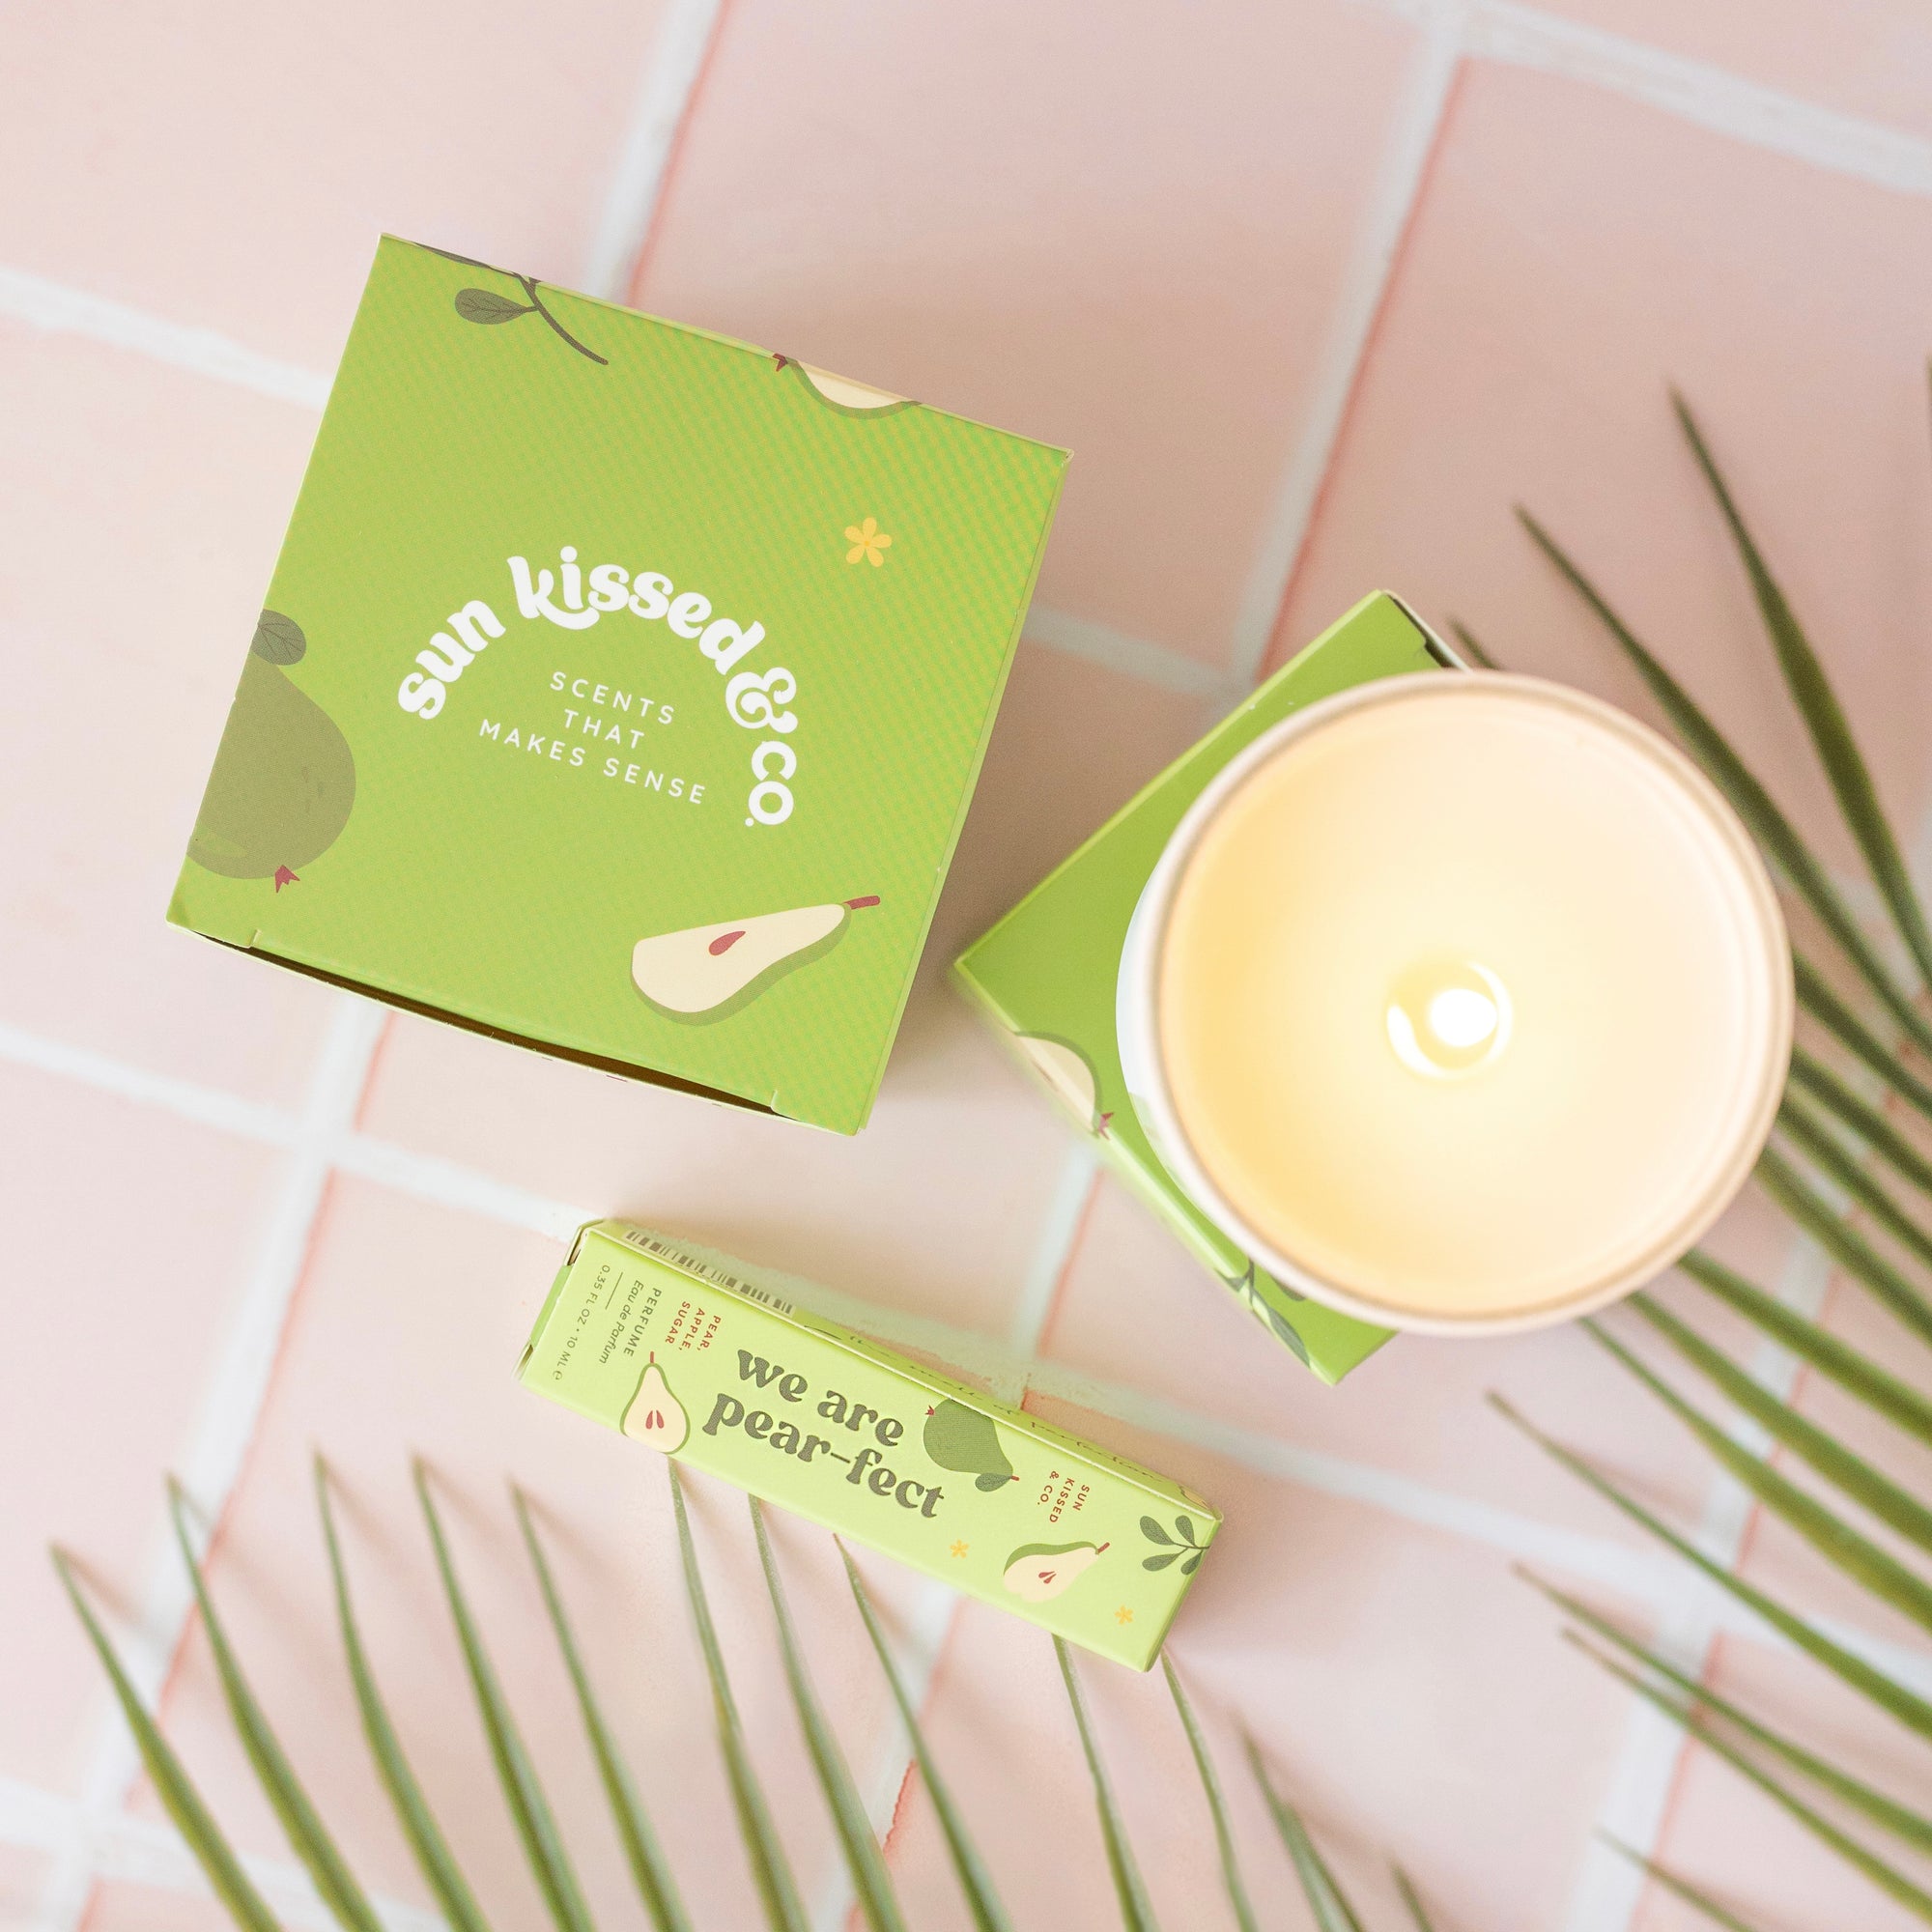 We Are Pear-fect Candle